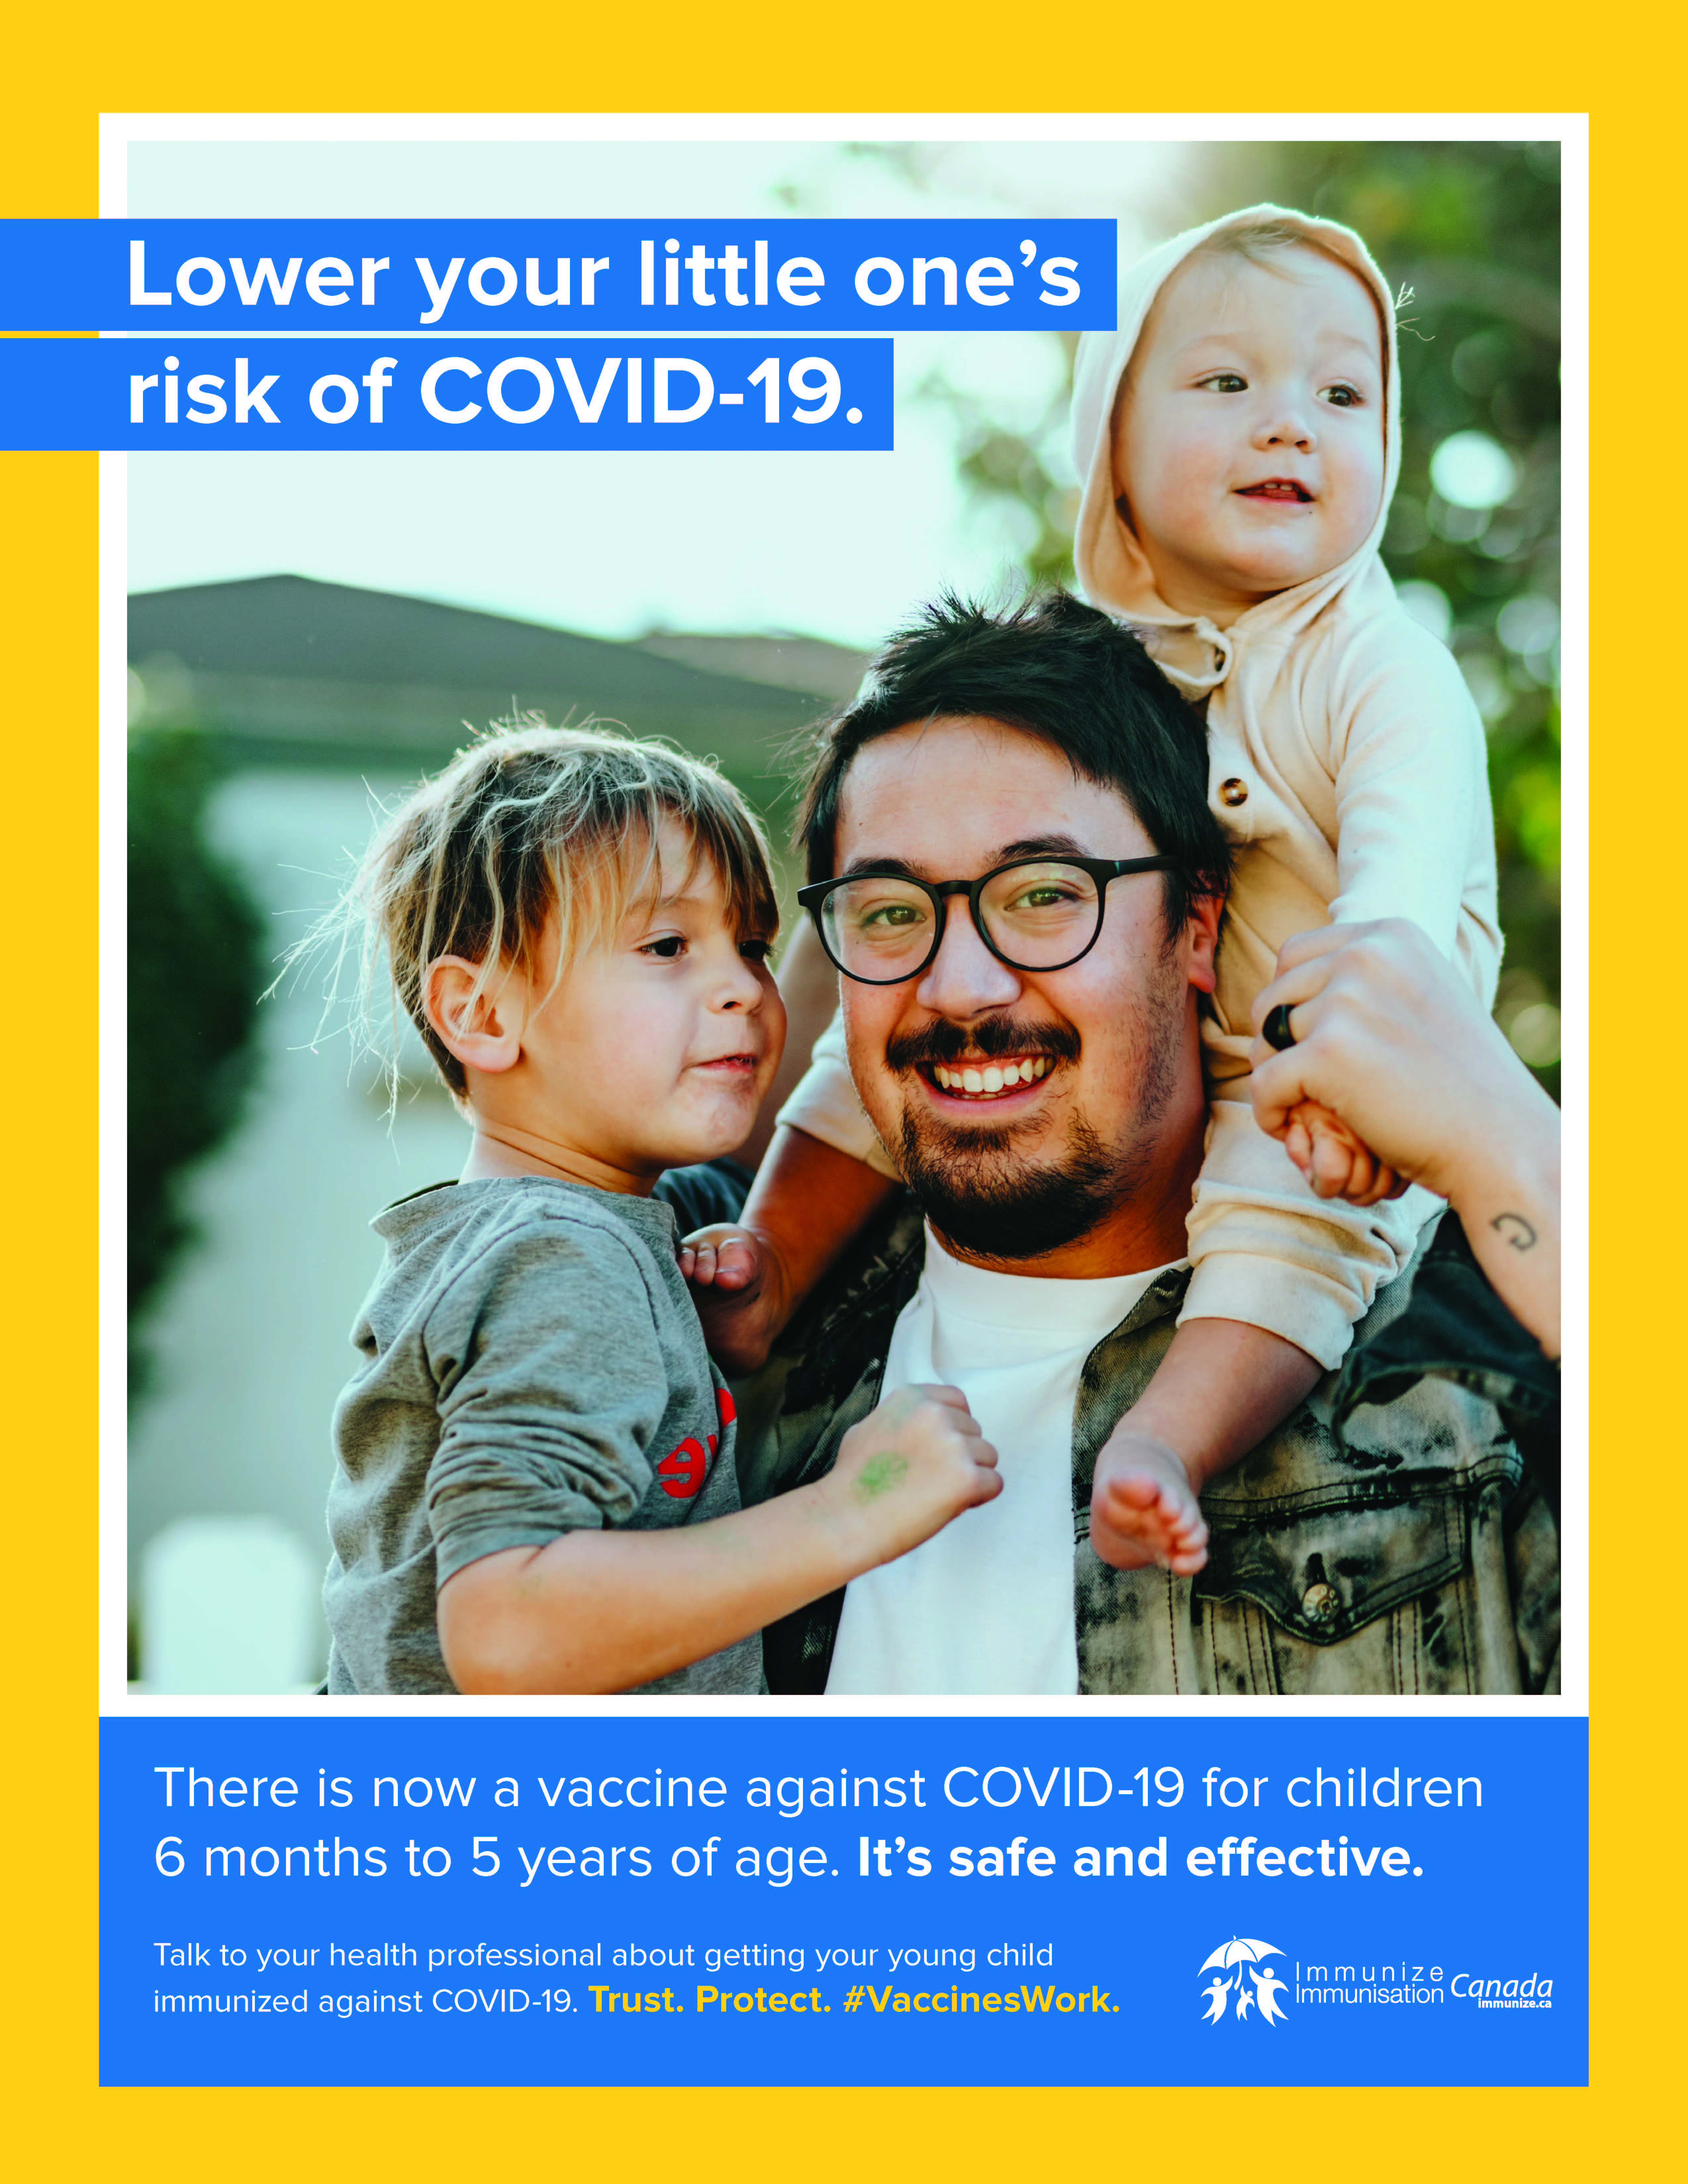 Lower your little one's risk of COVID-19 (poster 1)